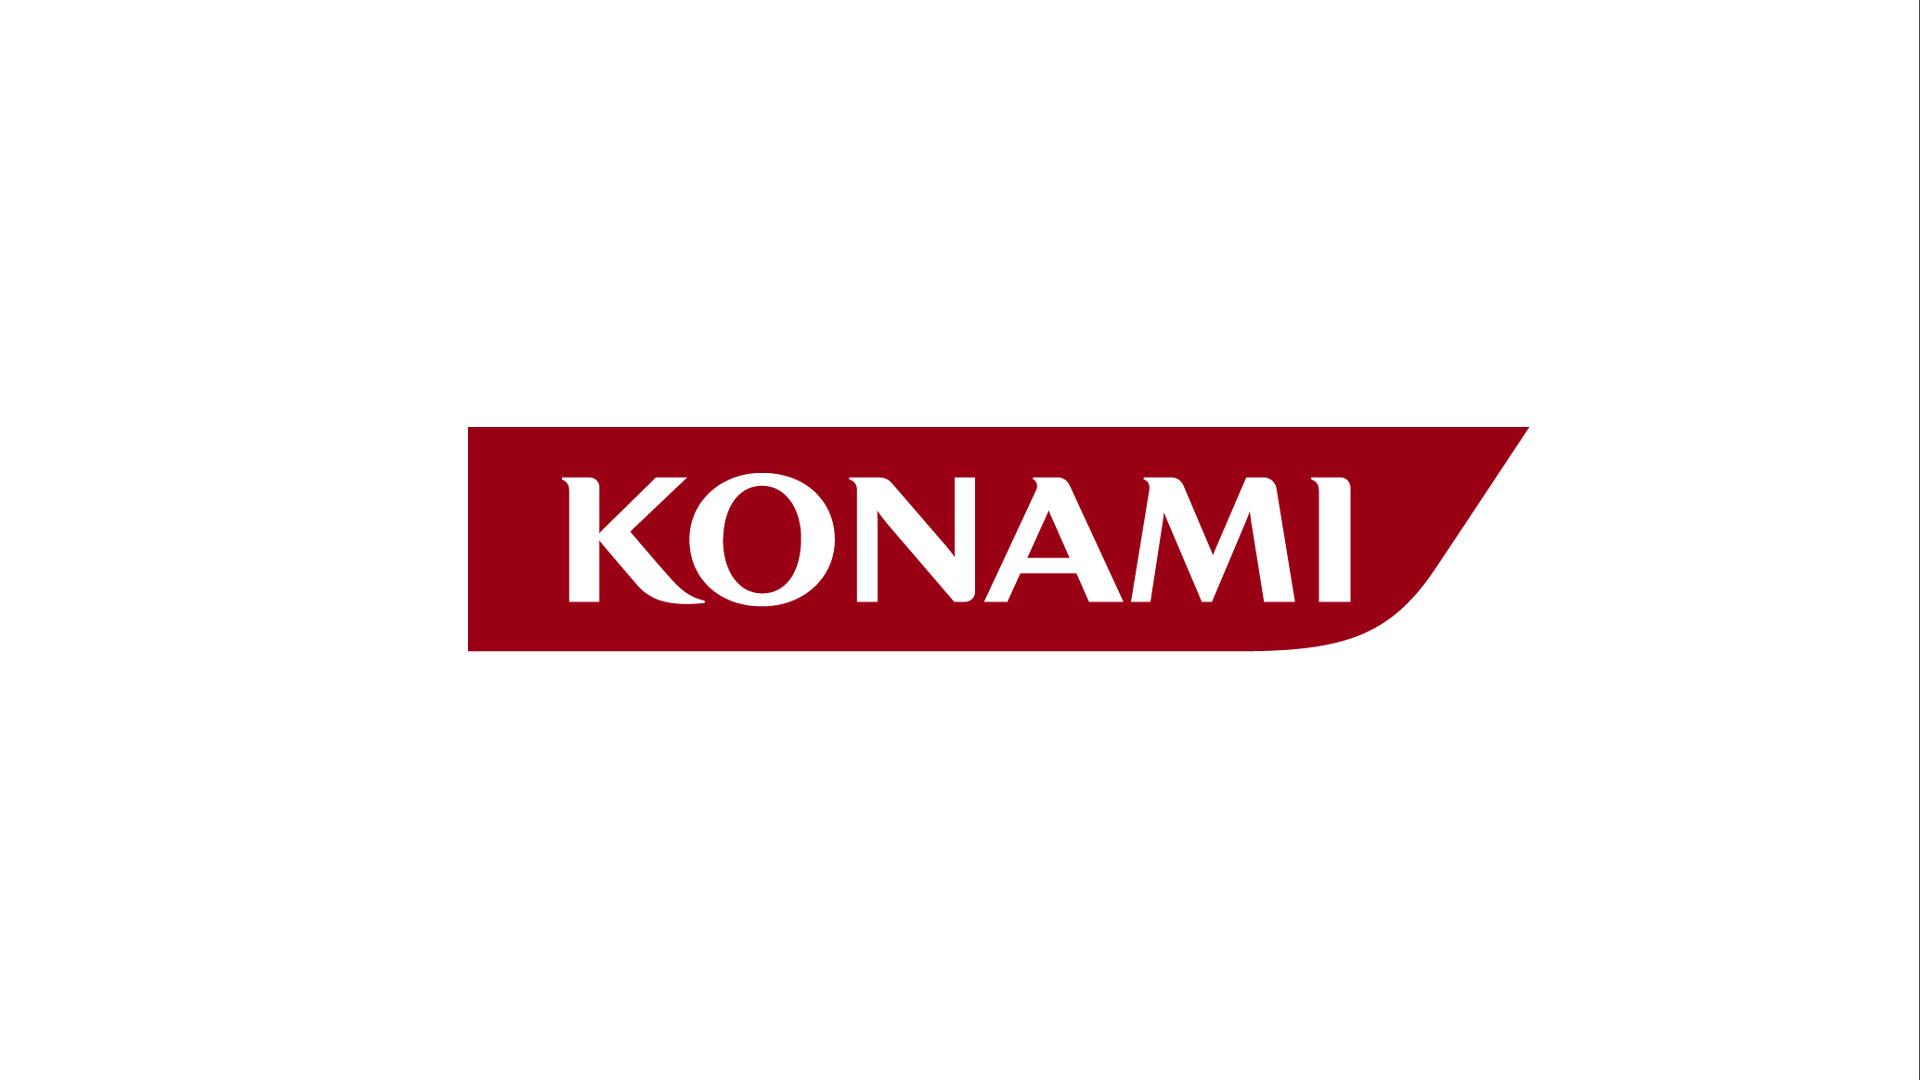 Konami issues an apology to fans, promises focus on consoles